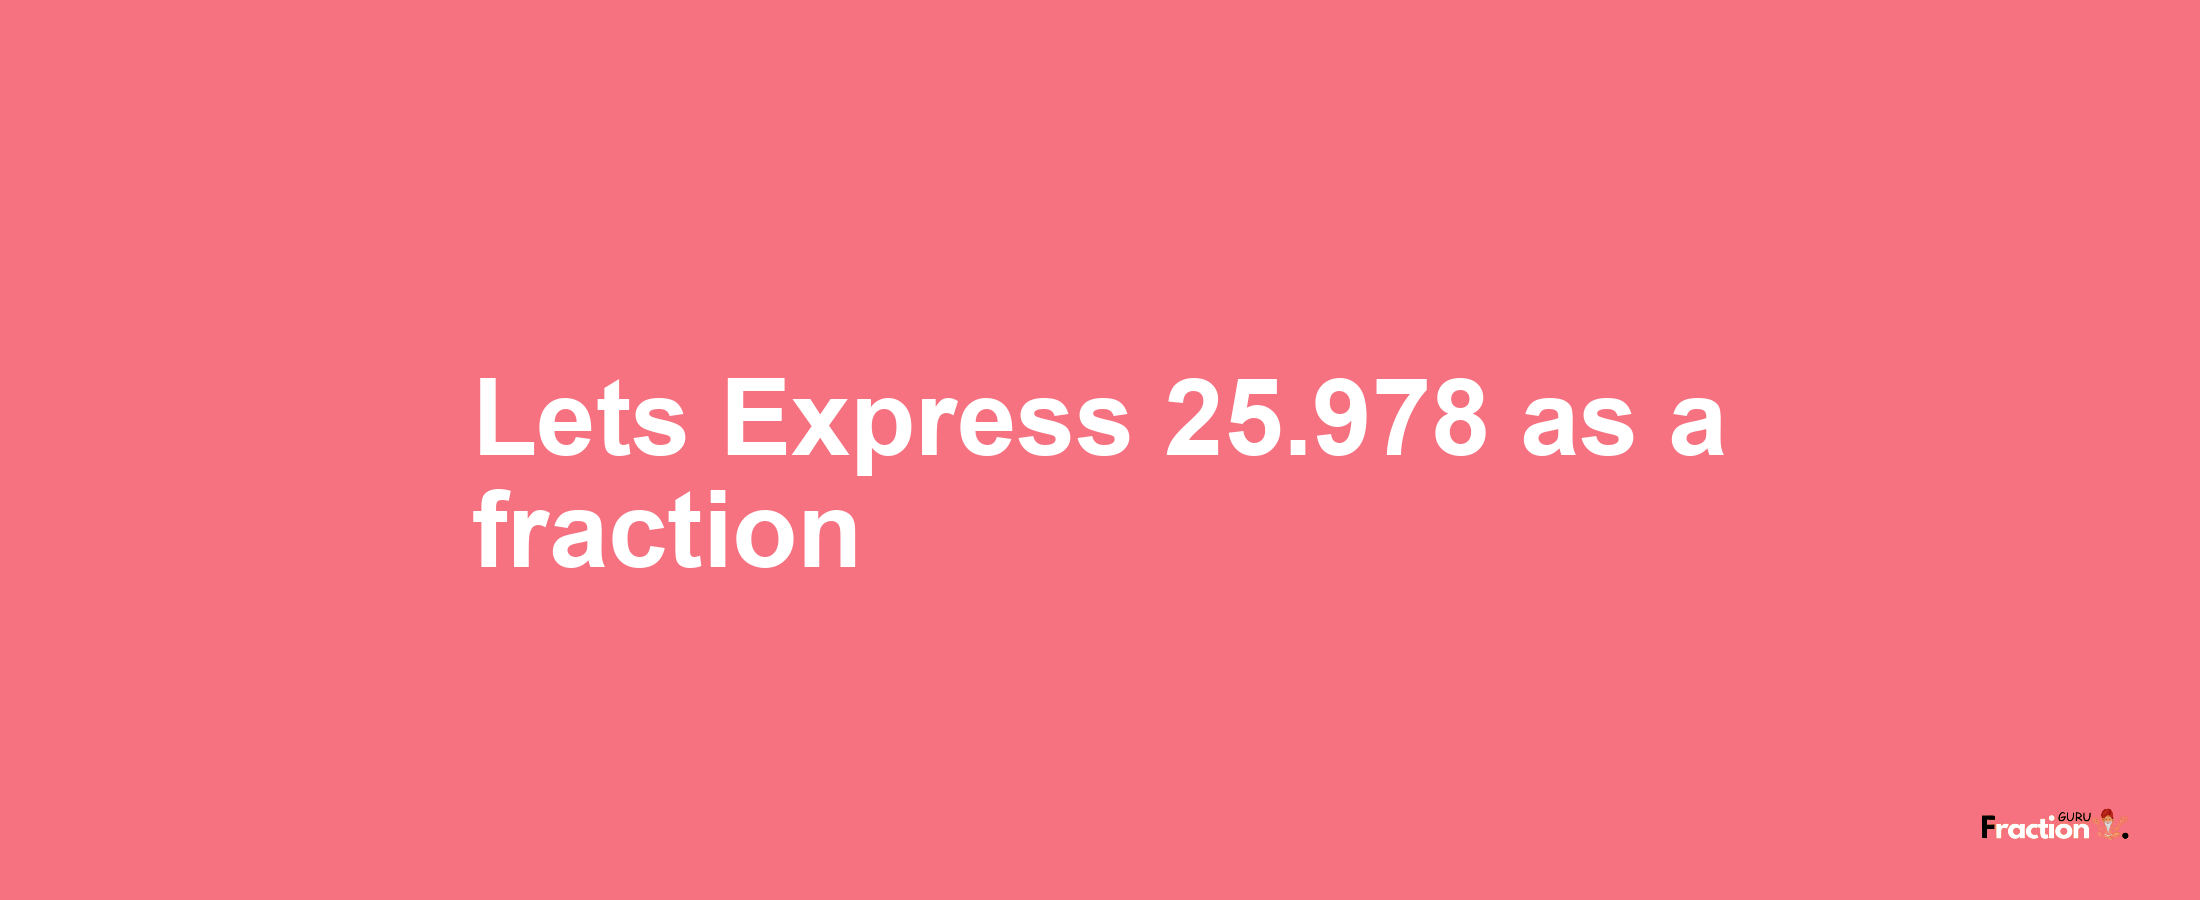 Lets Express 25.978 as afraction